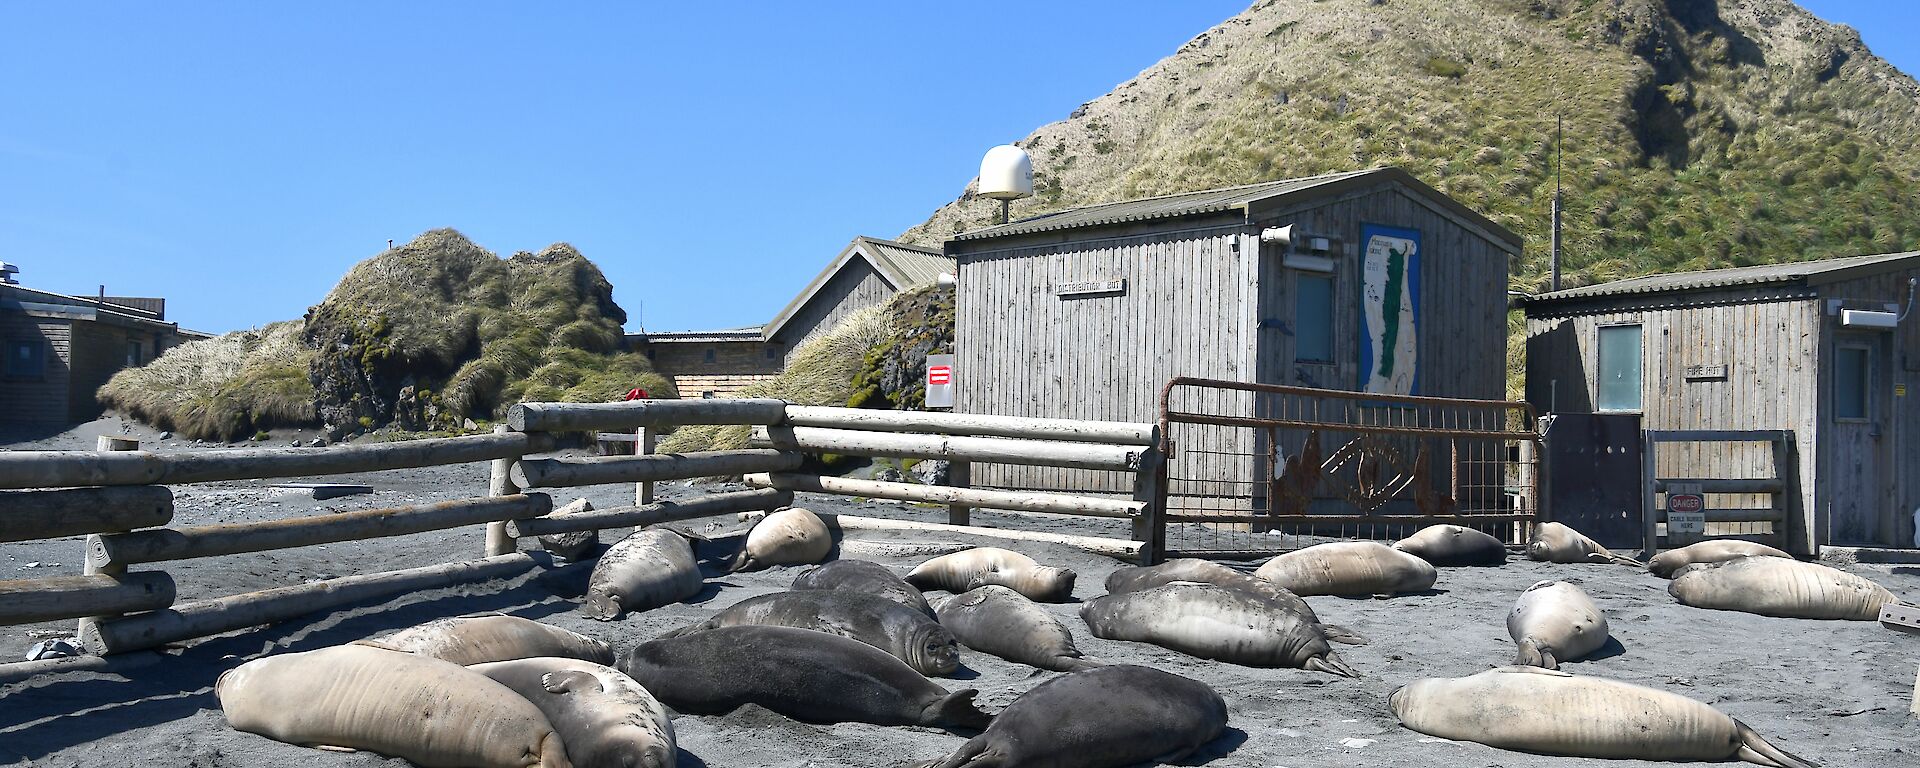 18 Elephant seal weaners are lying in front of a wooden fence and building